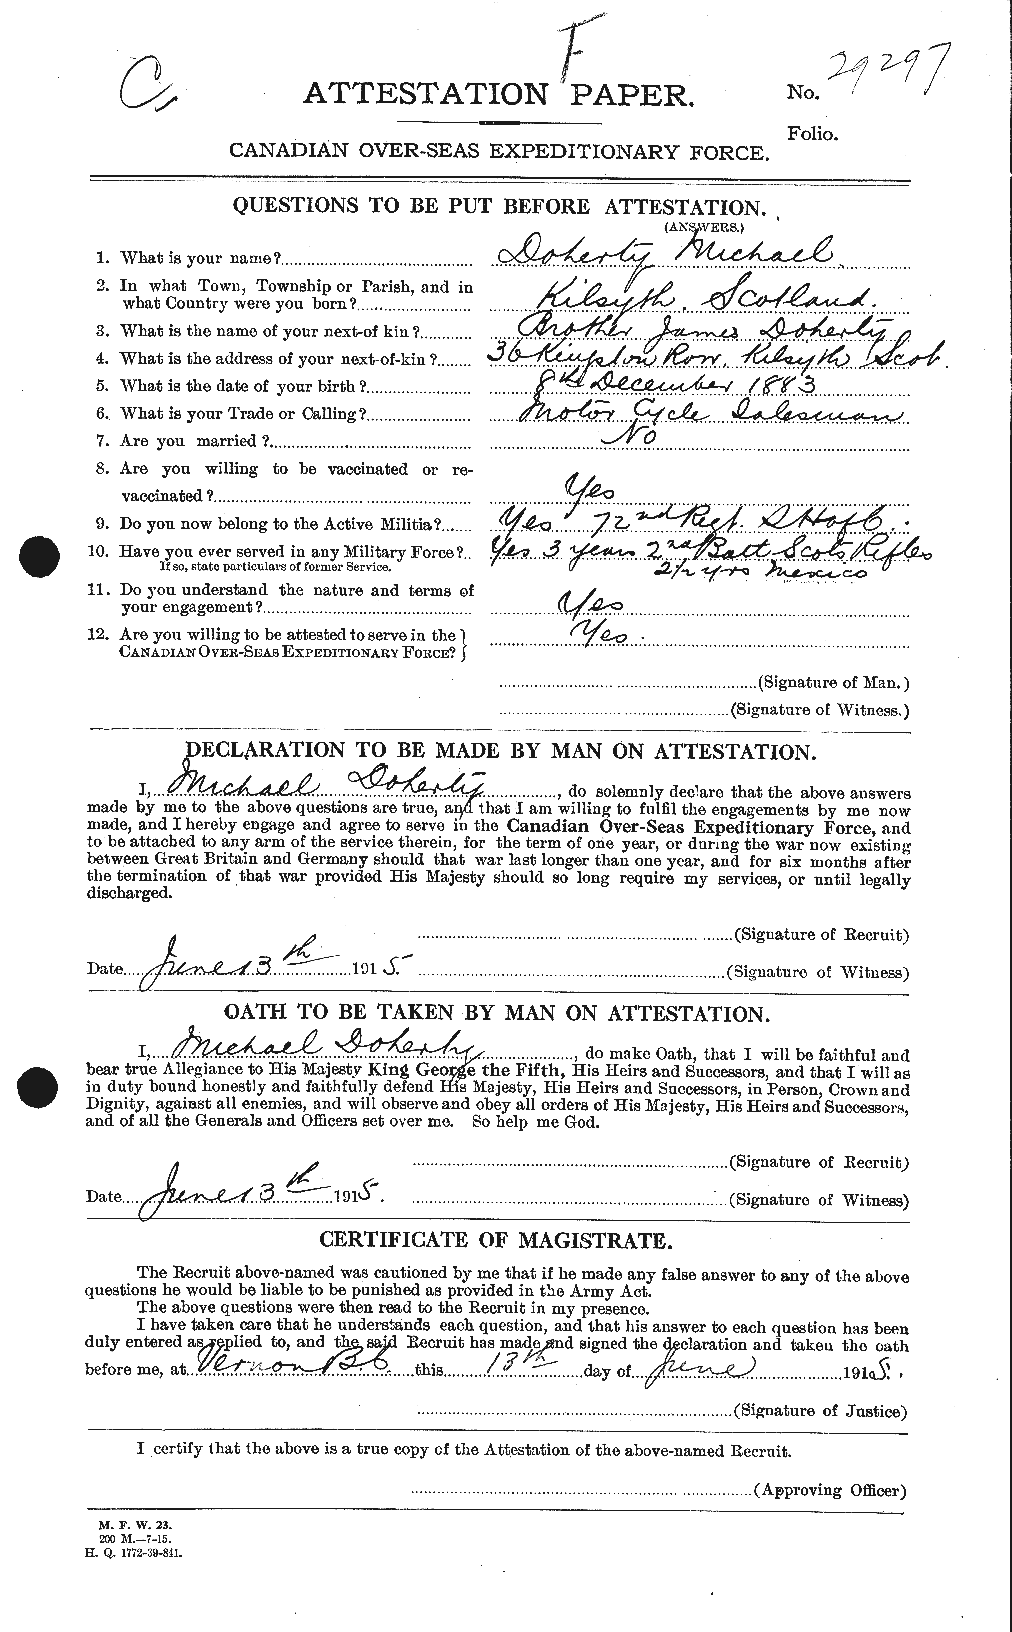 Personnel Records of the First World War - CEF 297622a